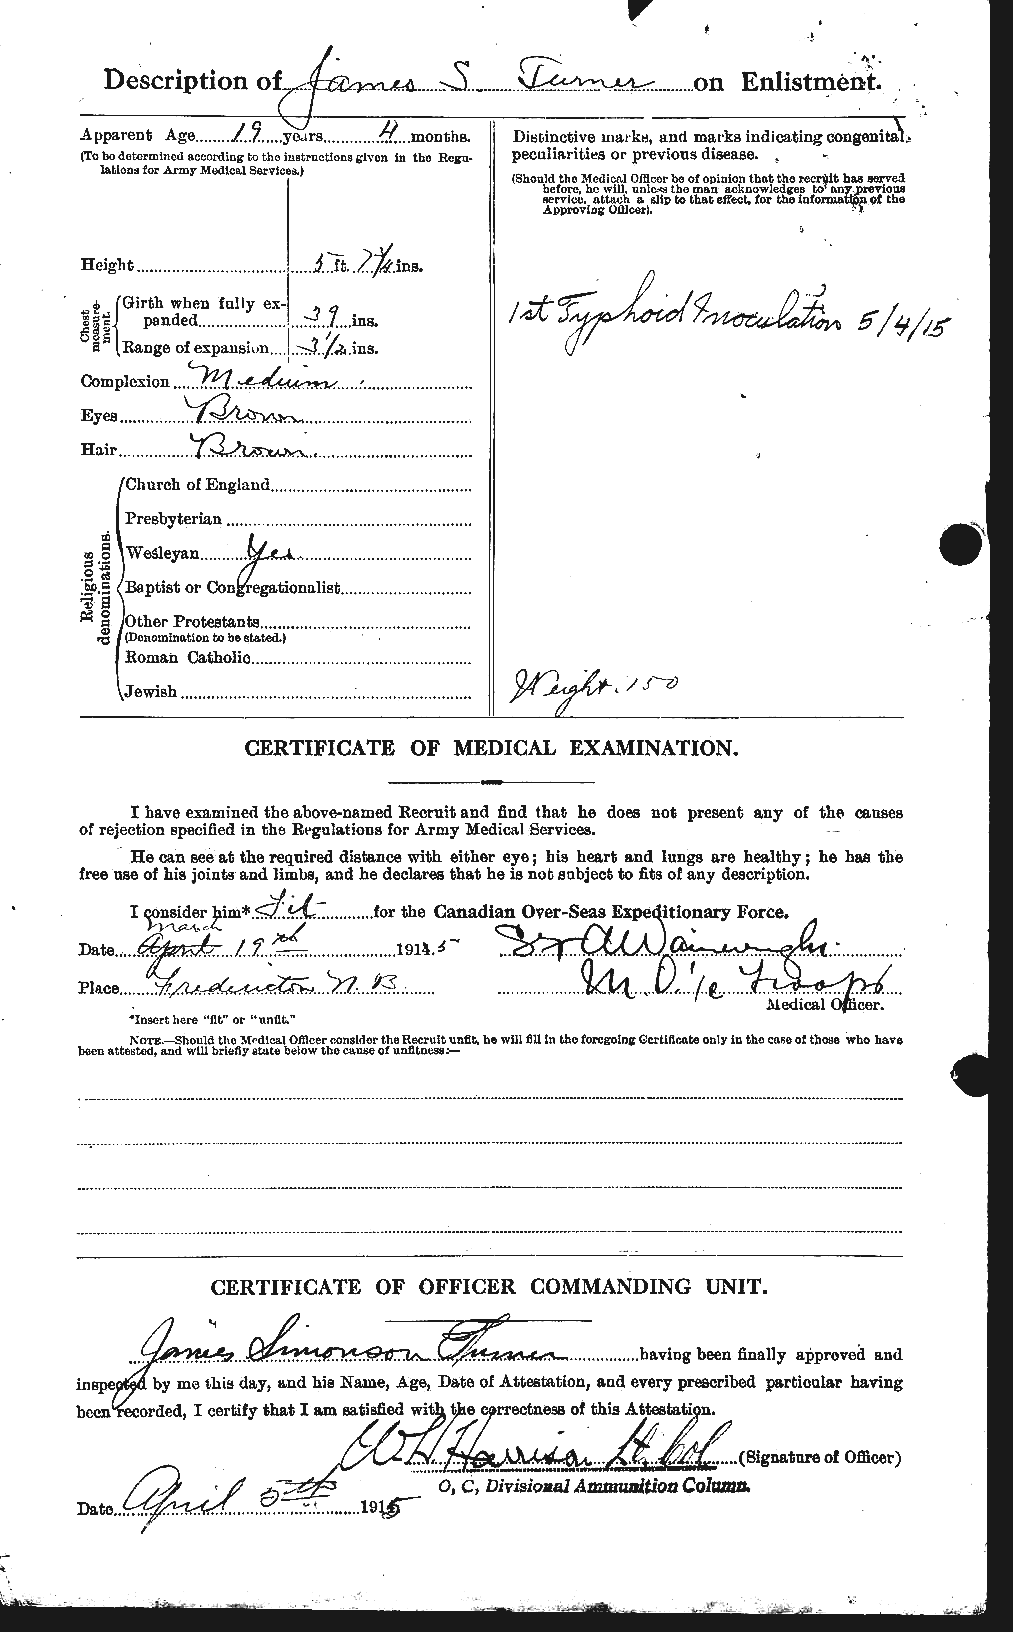 Personnel Records of the First World War - CEF 642024b